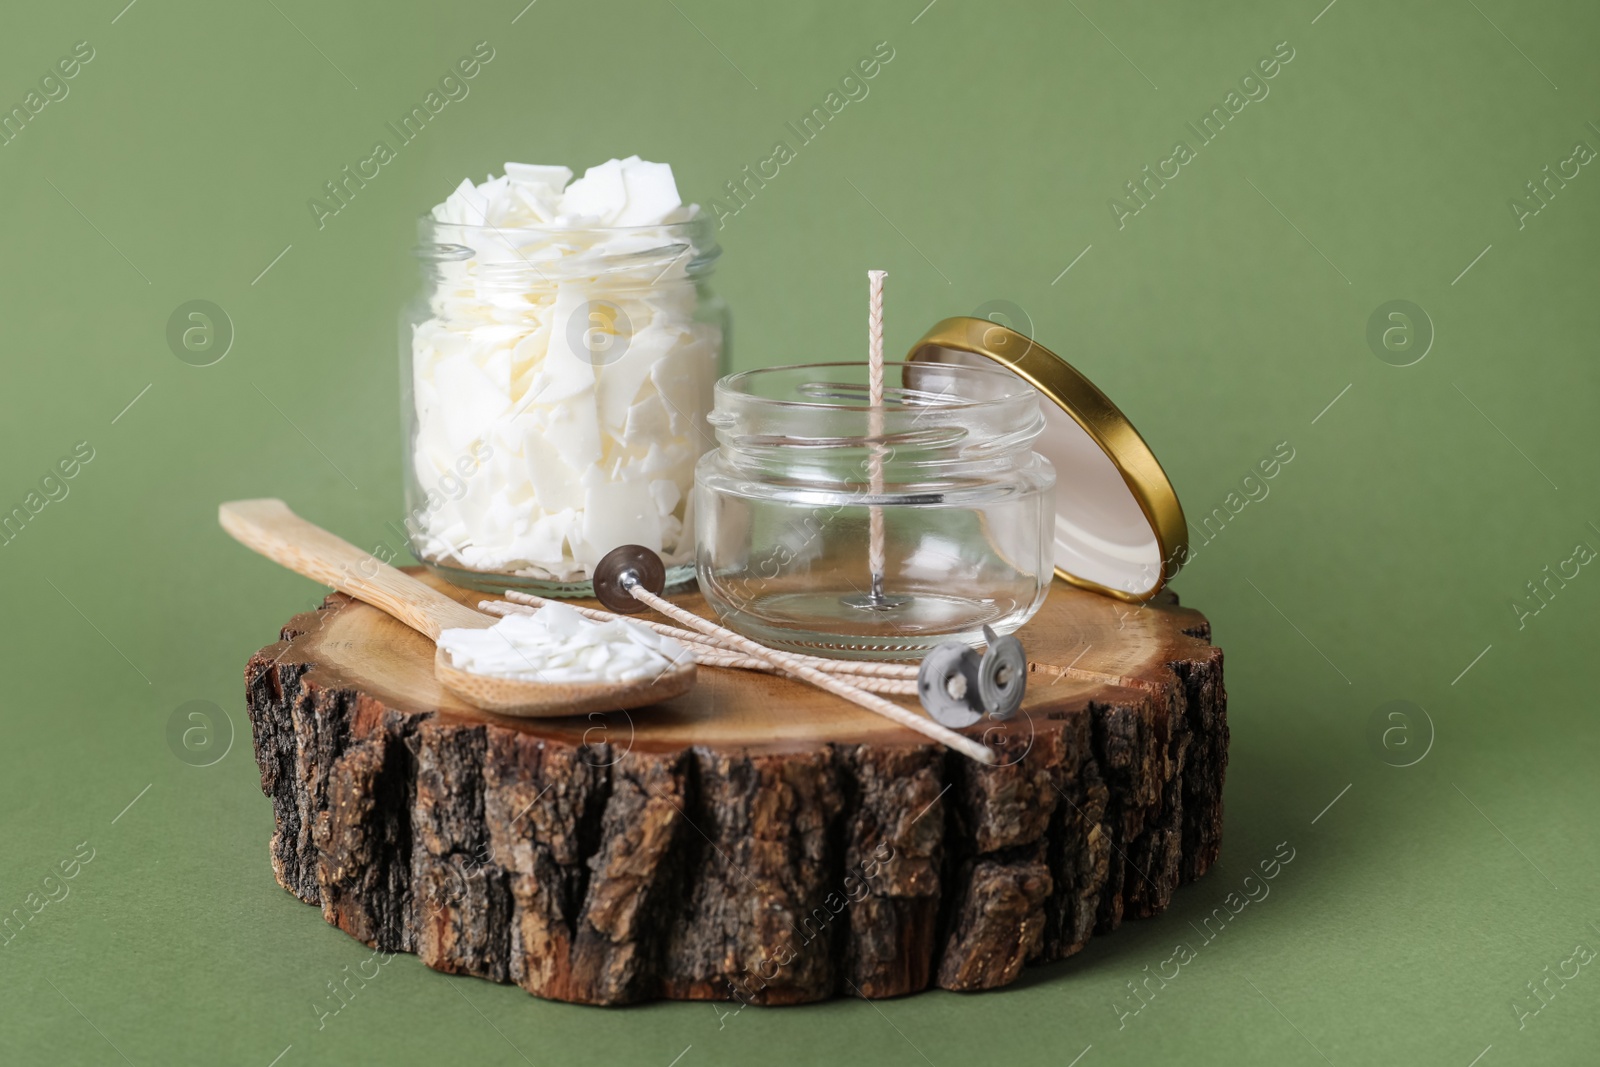 Photo of Ingredients for homemade candle on wooden stump against green background